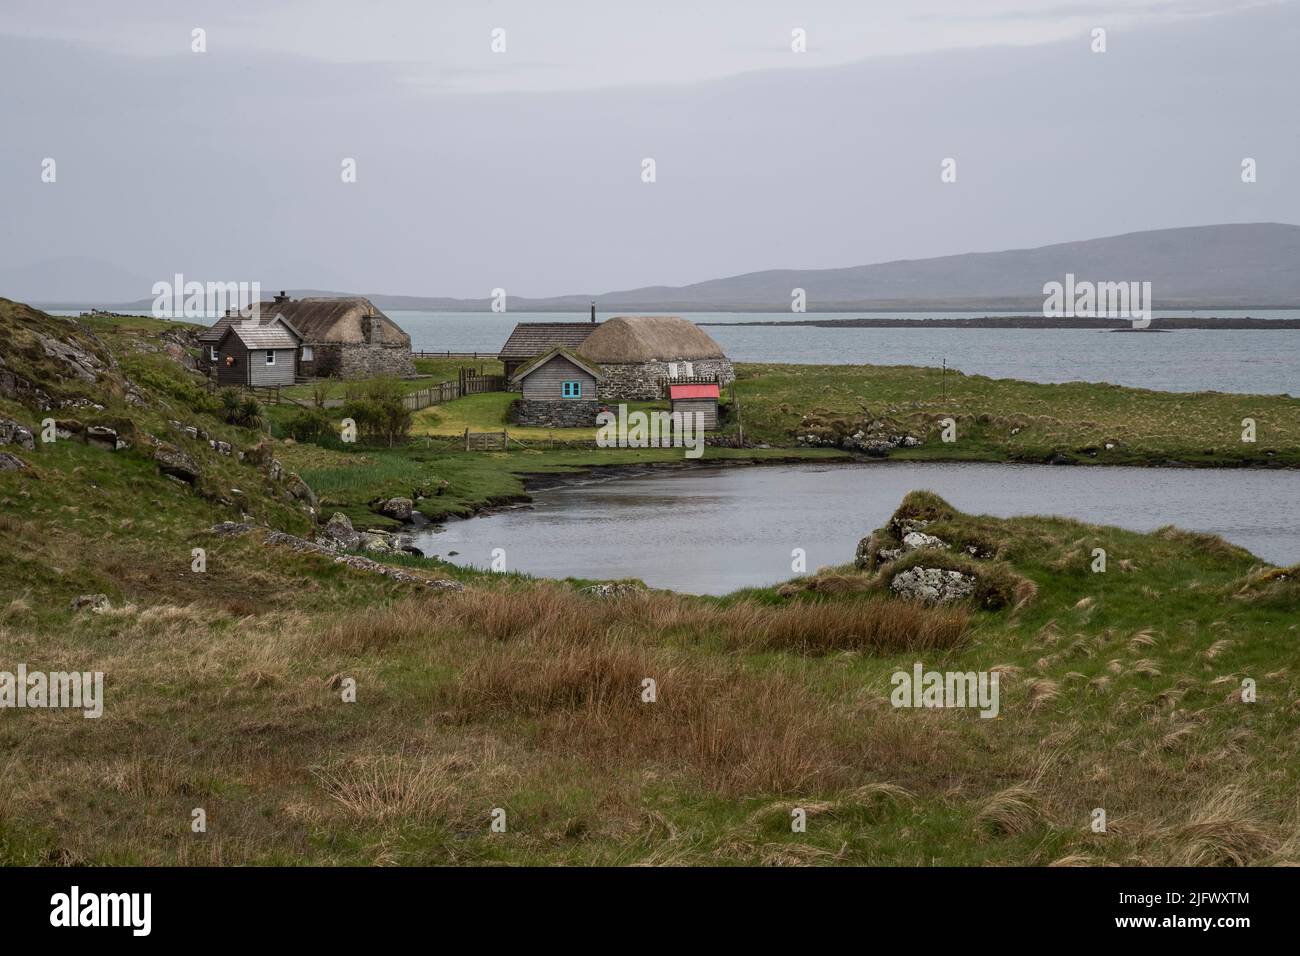 Two old thatched cottages and outhouses on an inlet near Berneray Harbour, in in the Sound of Harris, Berneray Isle, Outer Hebrides, Scotland. Stock Photo